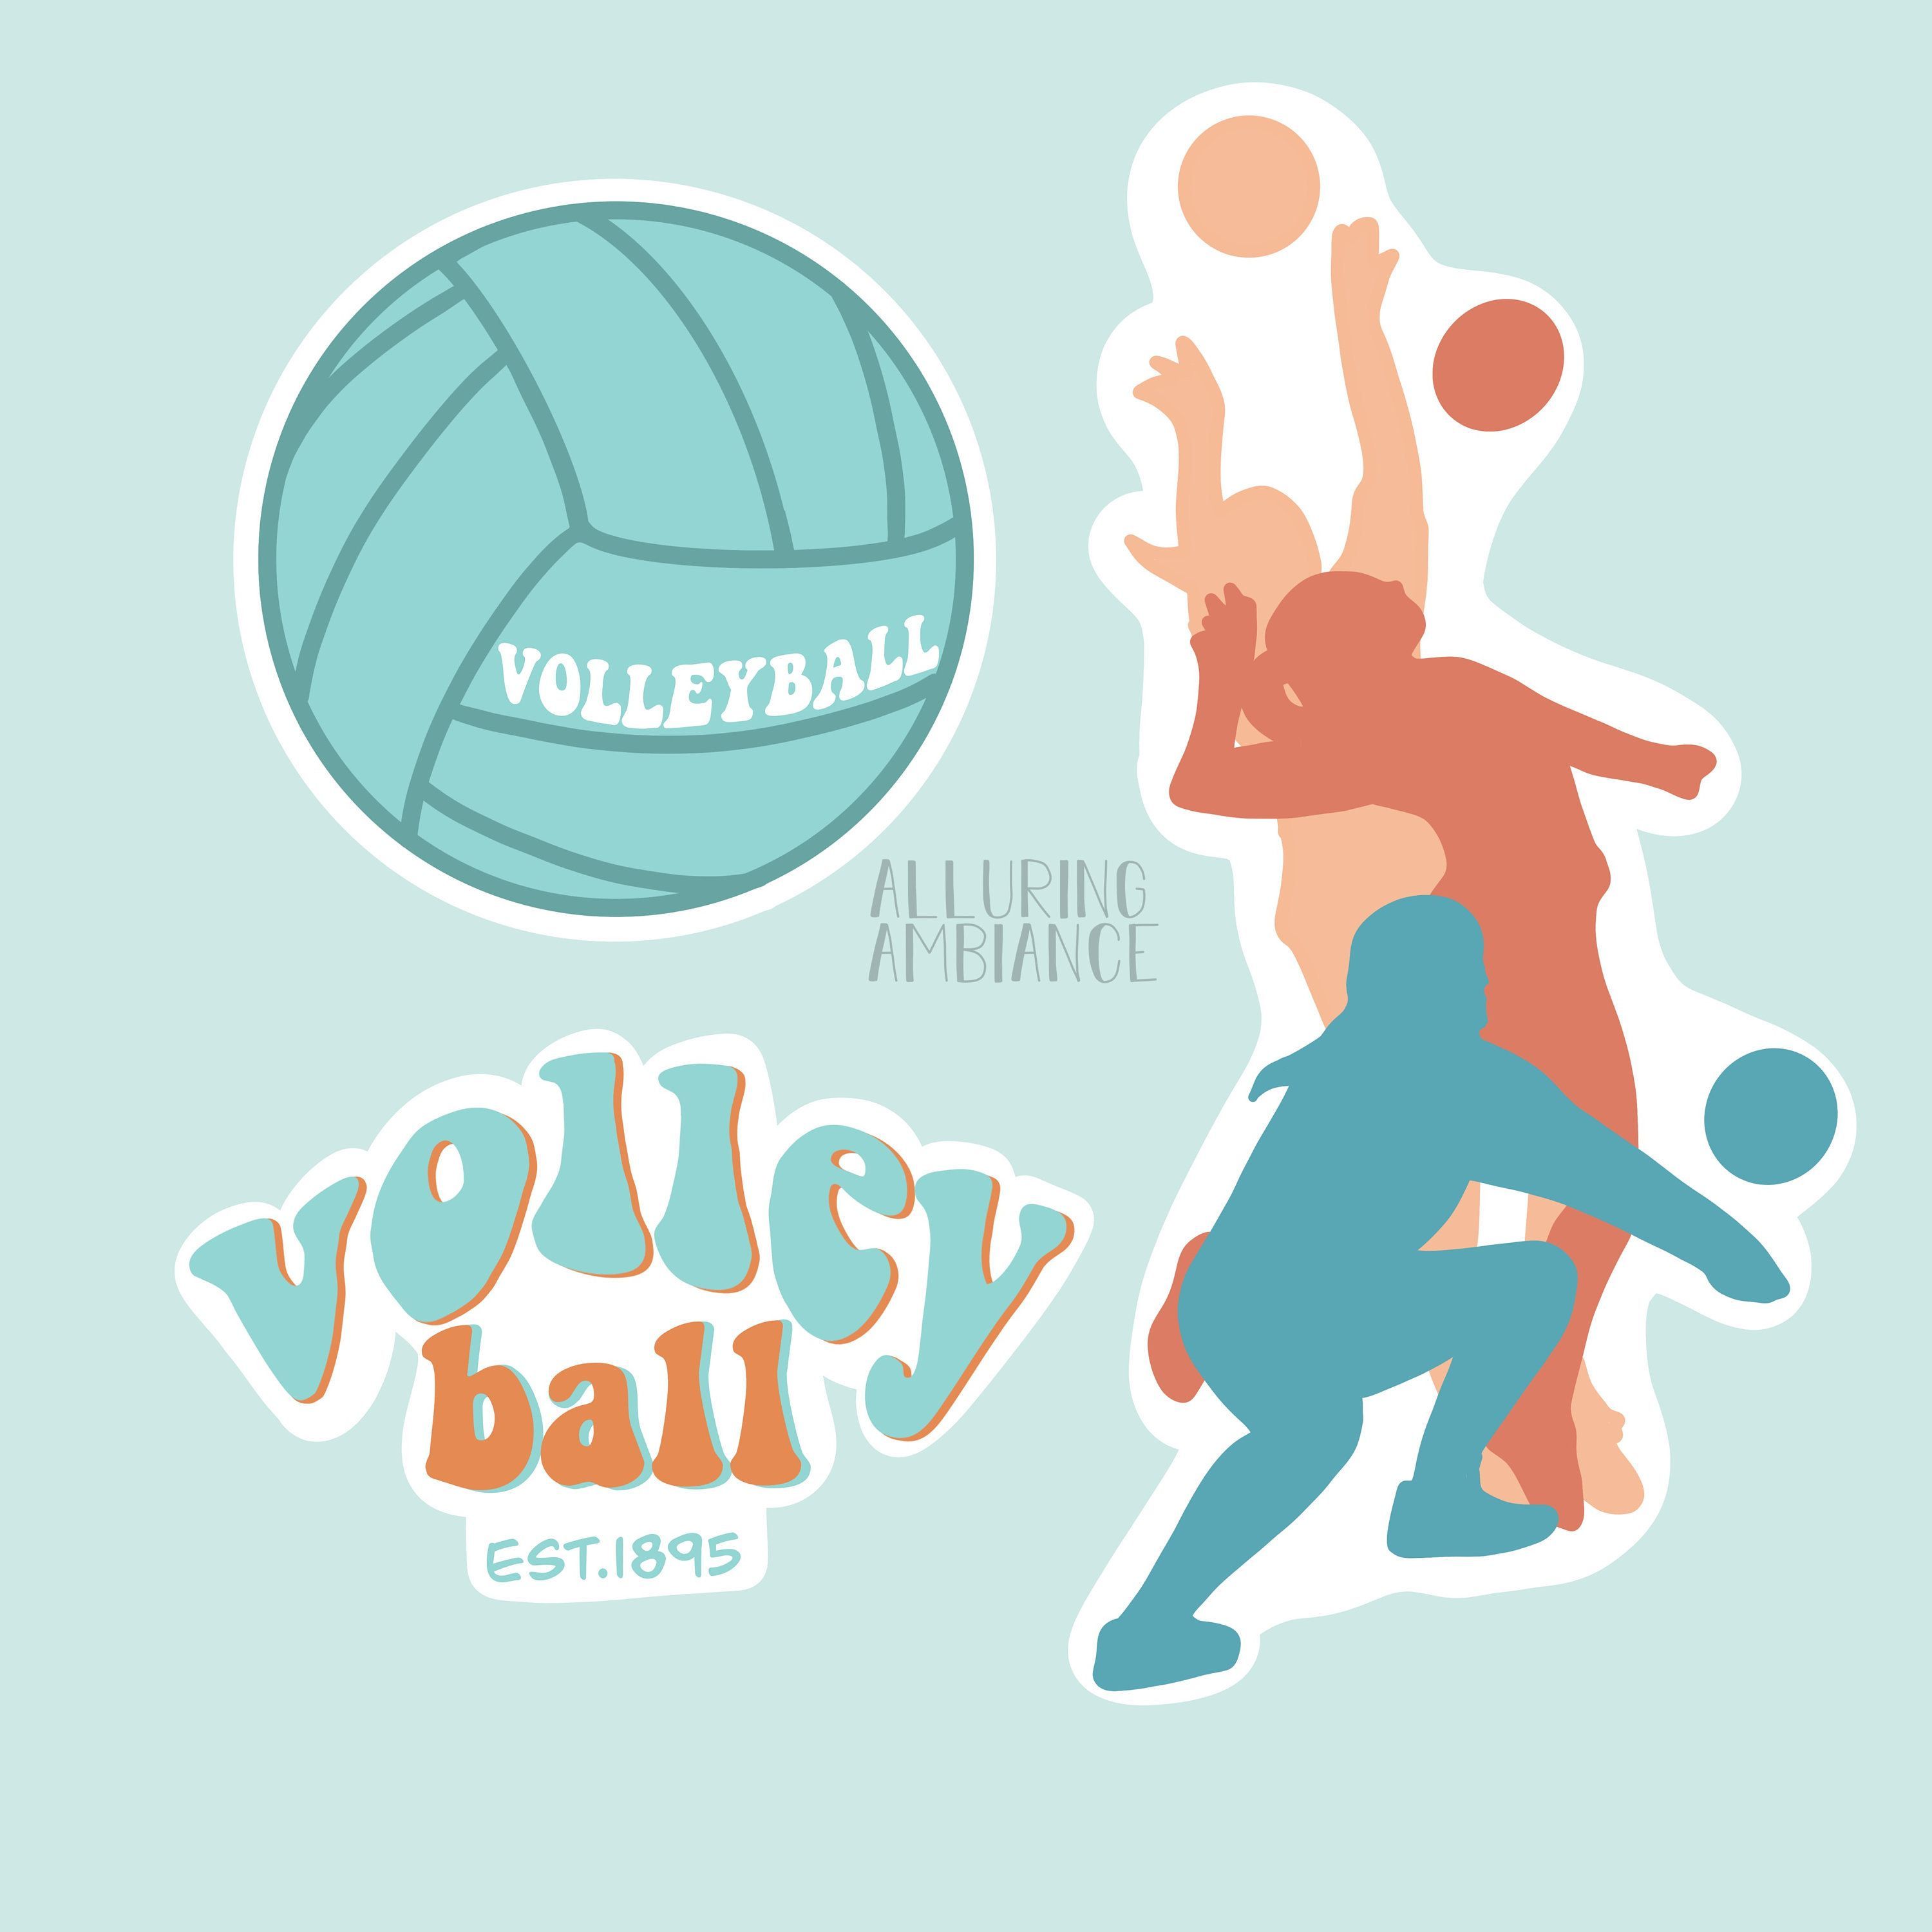 Volleyball wallpaper, Volleyball drawing, Volleyball background